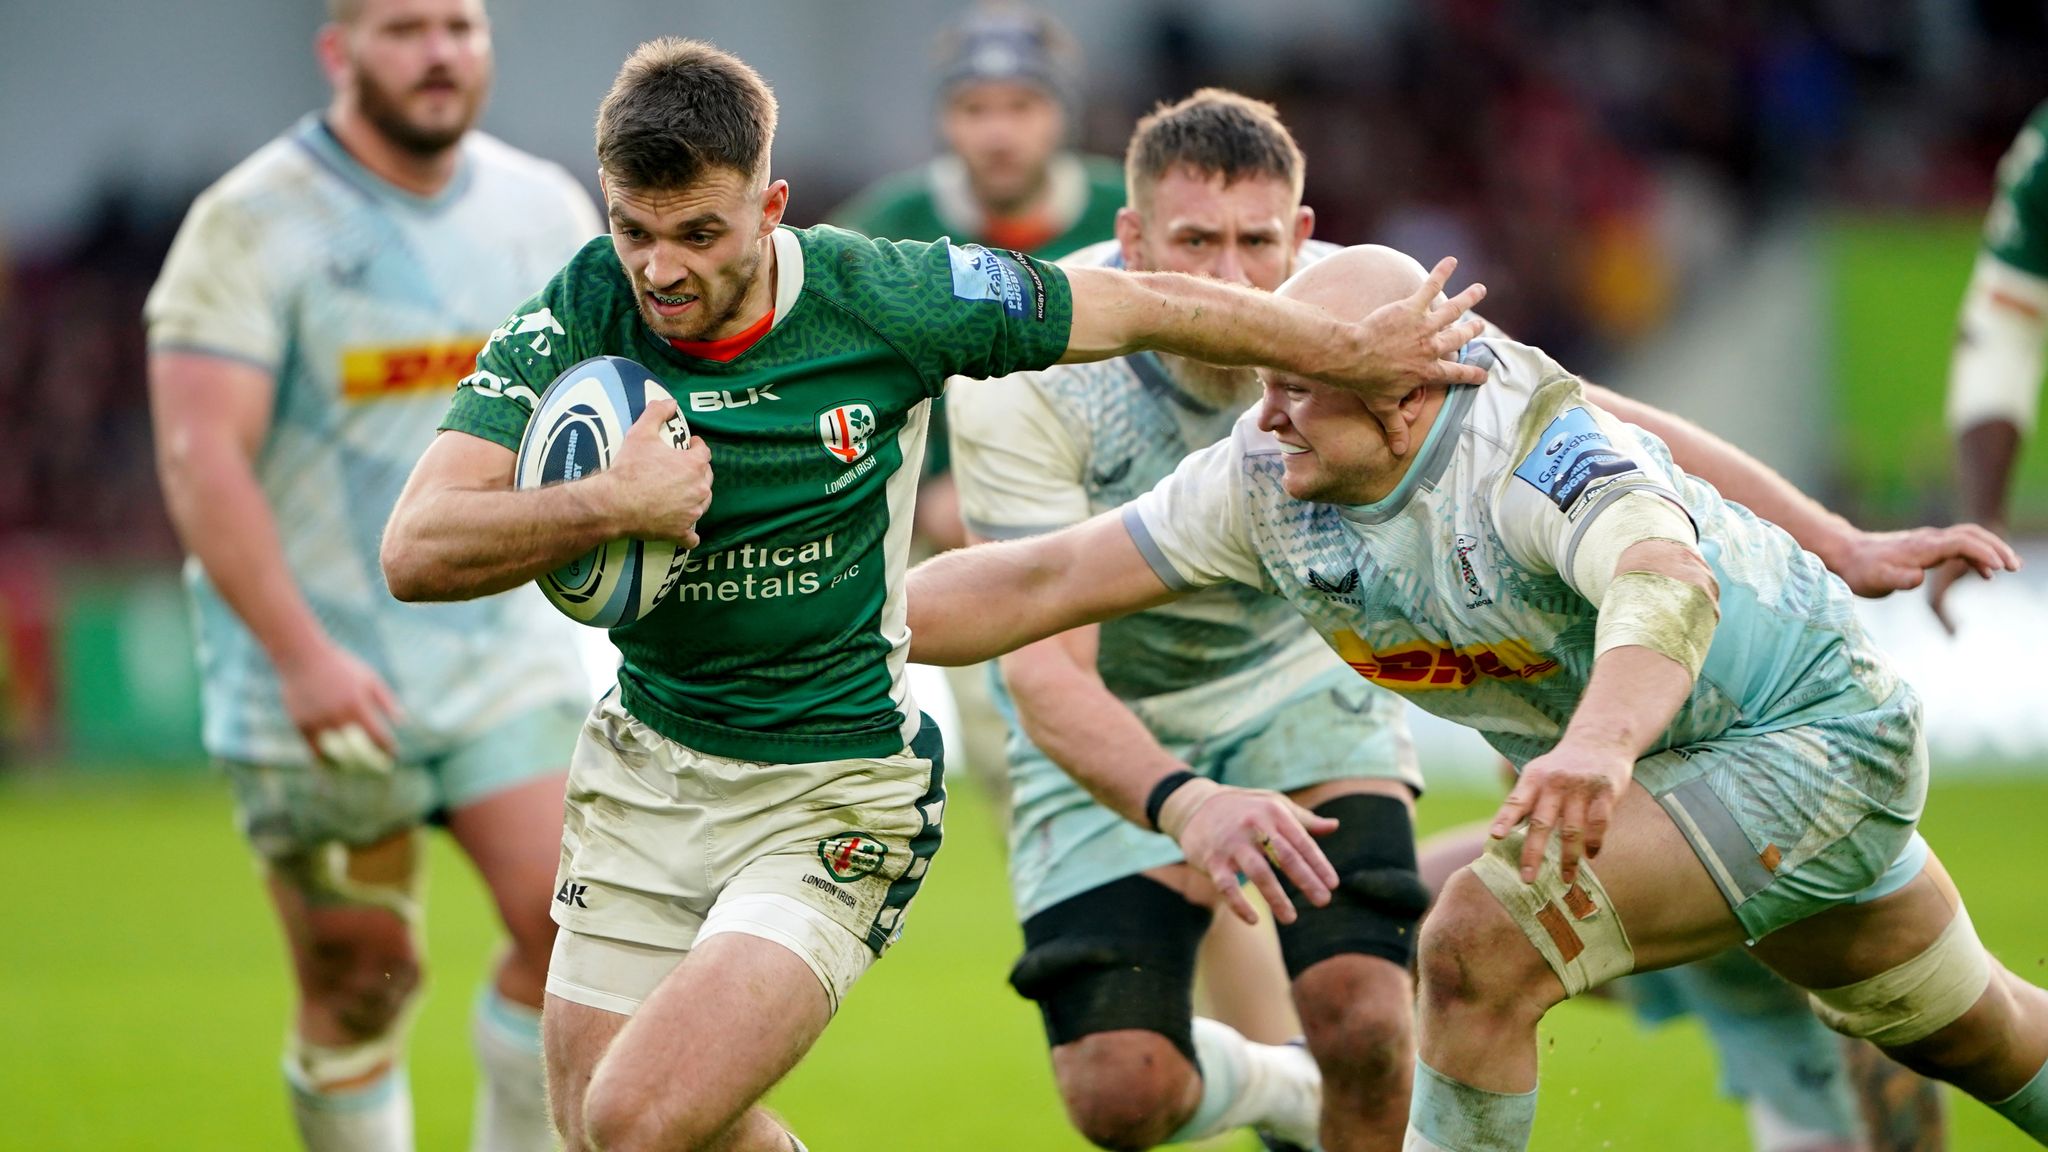 London Irish 42-24 Harlequins Quins slump to fourth consecutive Gallagher Premiership defeat Rugby Union News Sky Sports